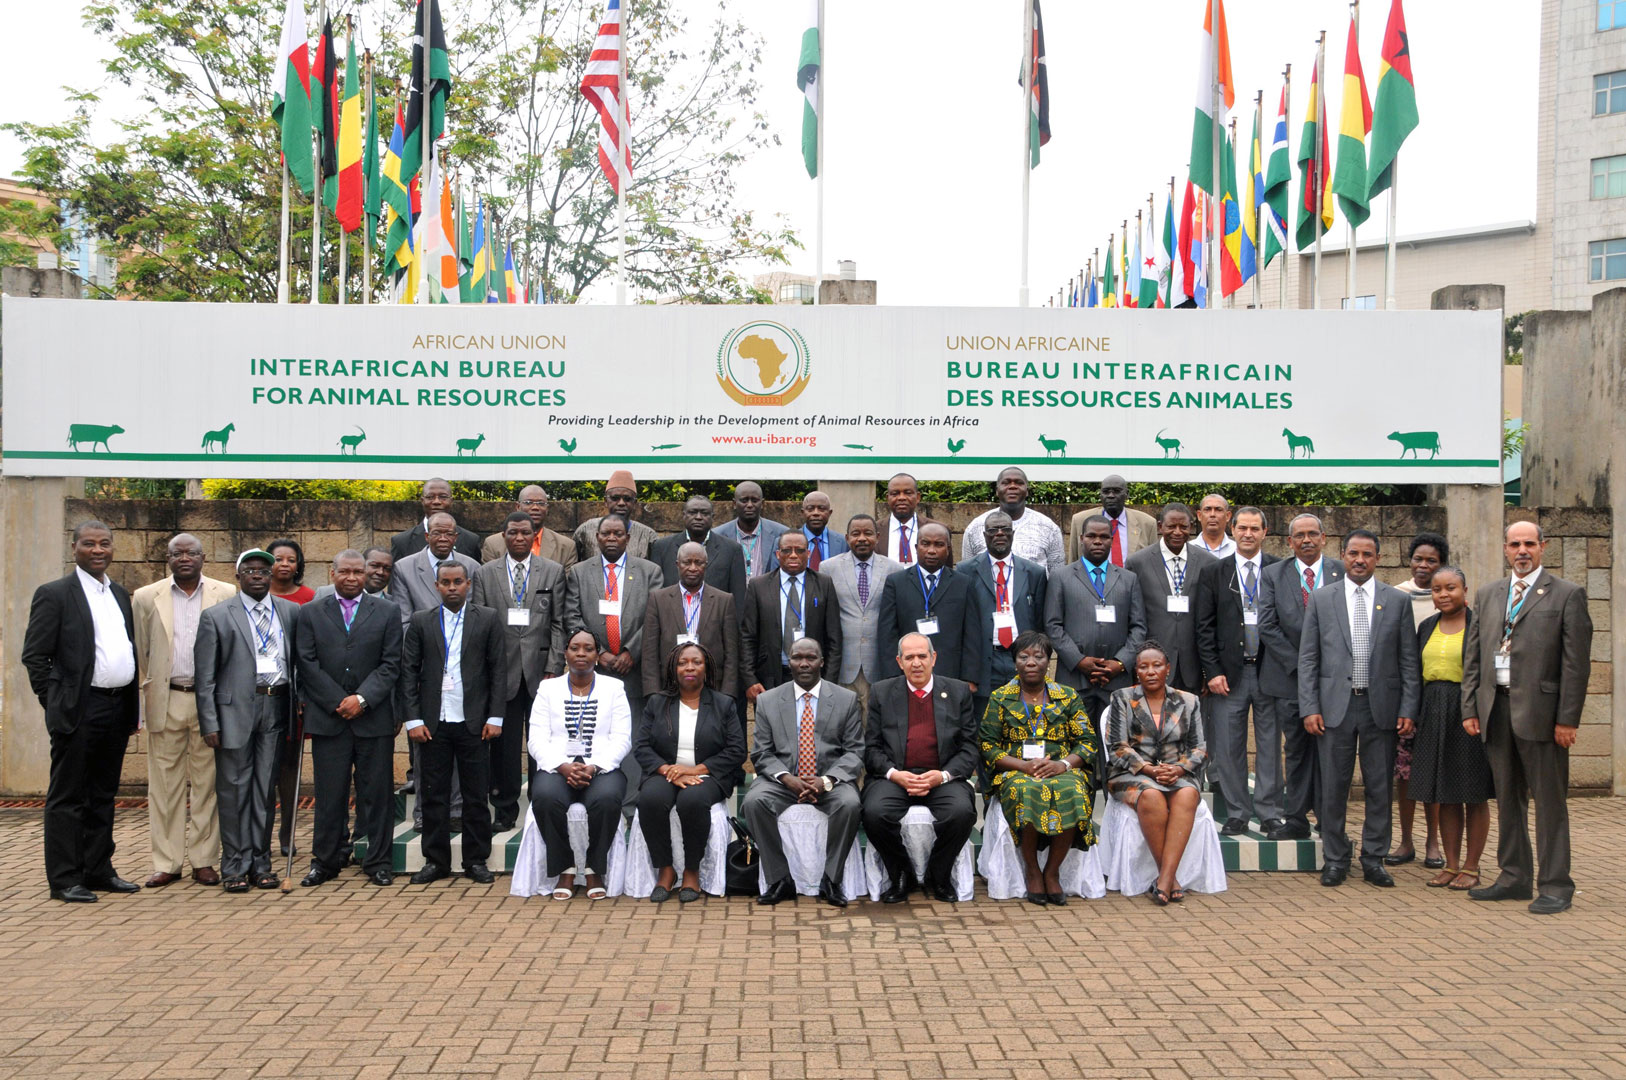 © 2015 AU-IBAR. Group photo of the participants at the forum.